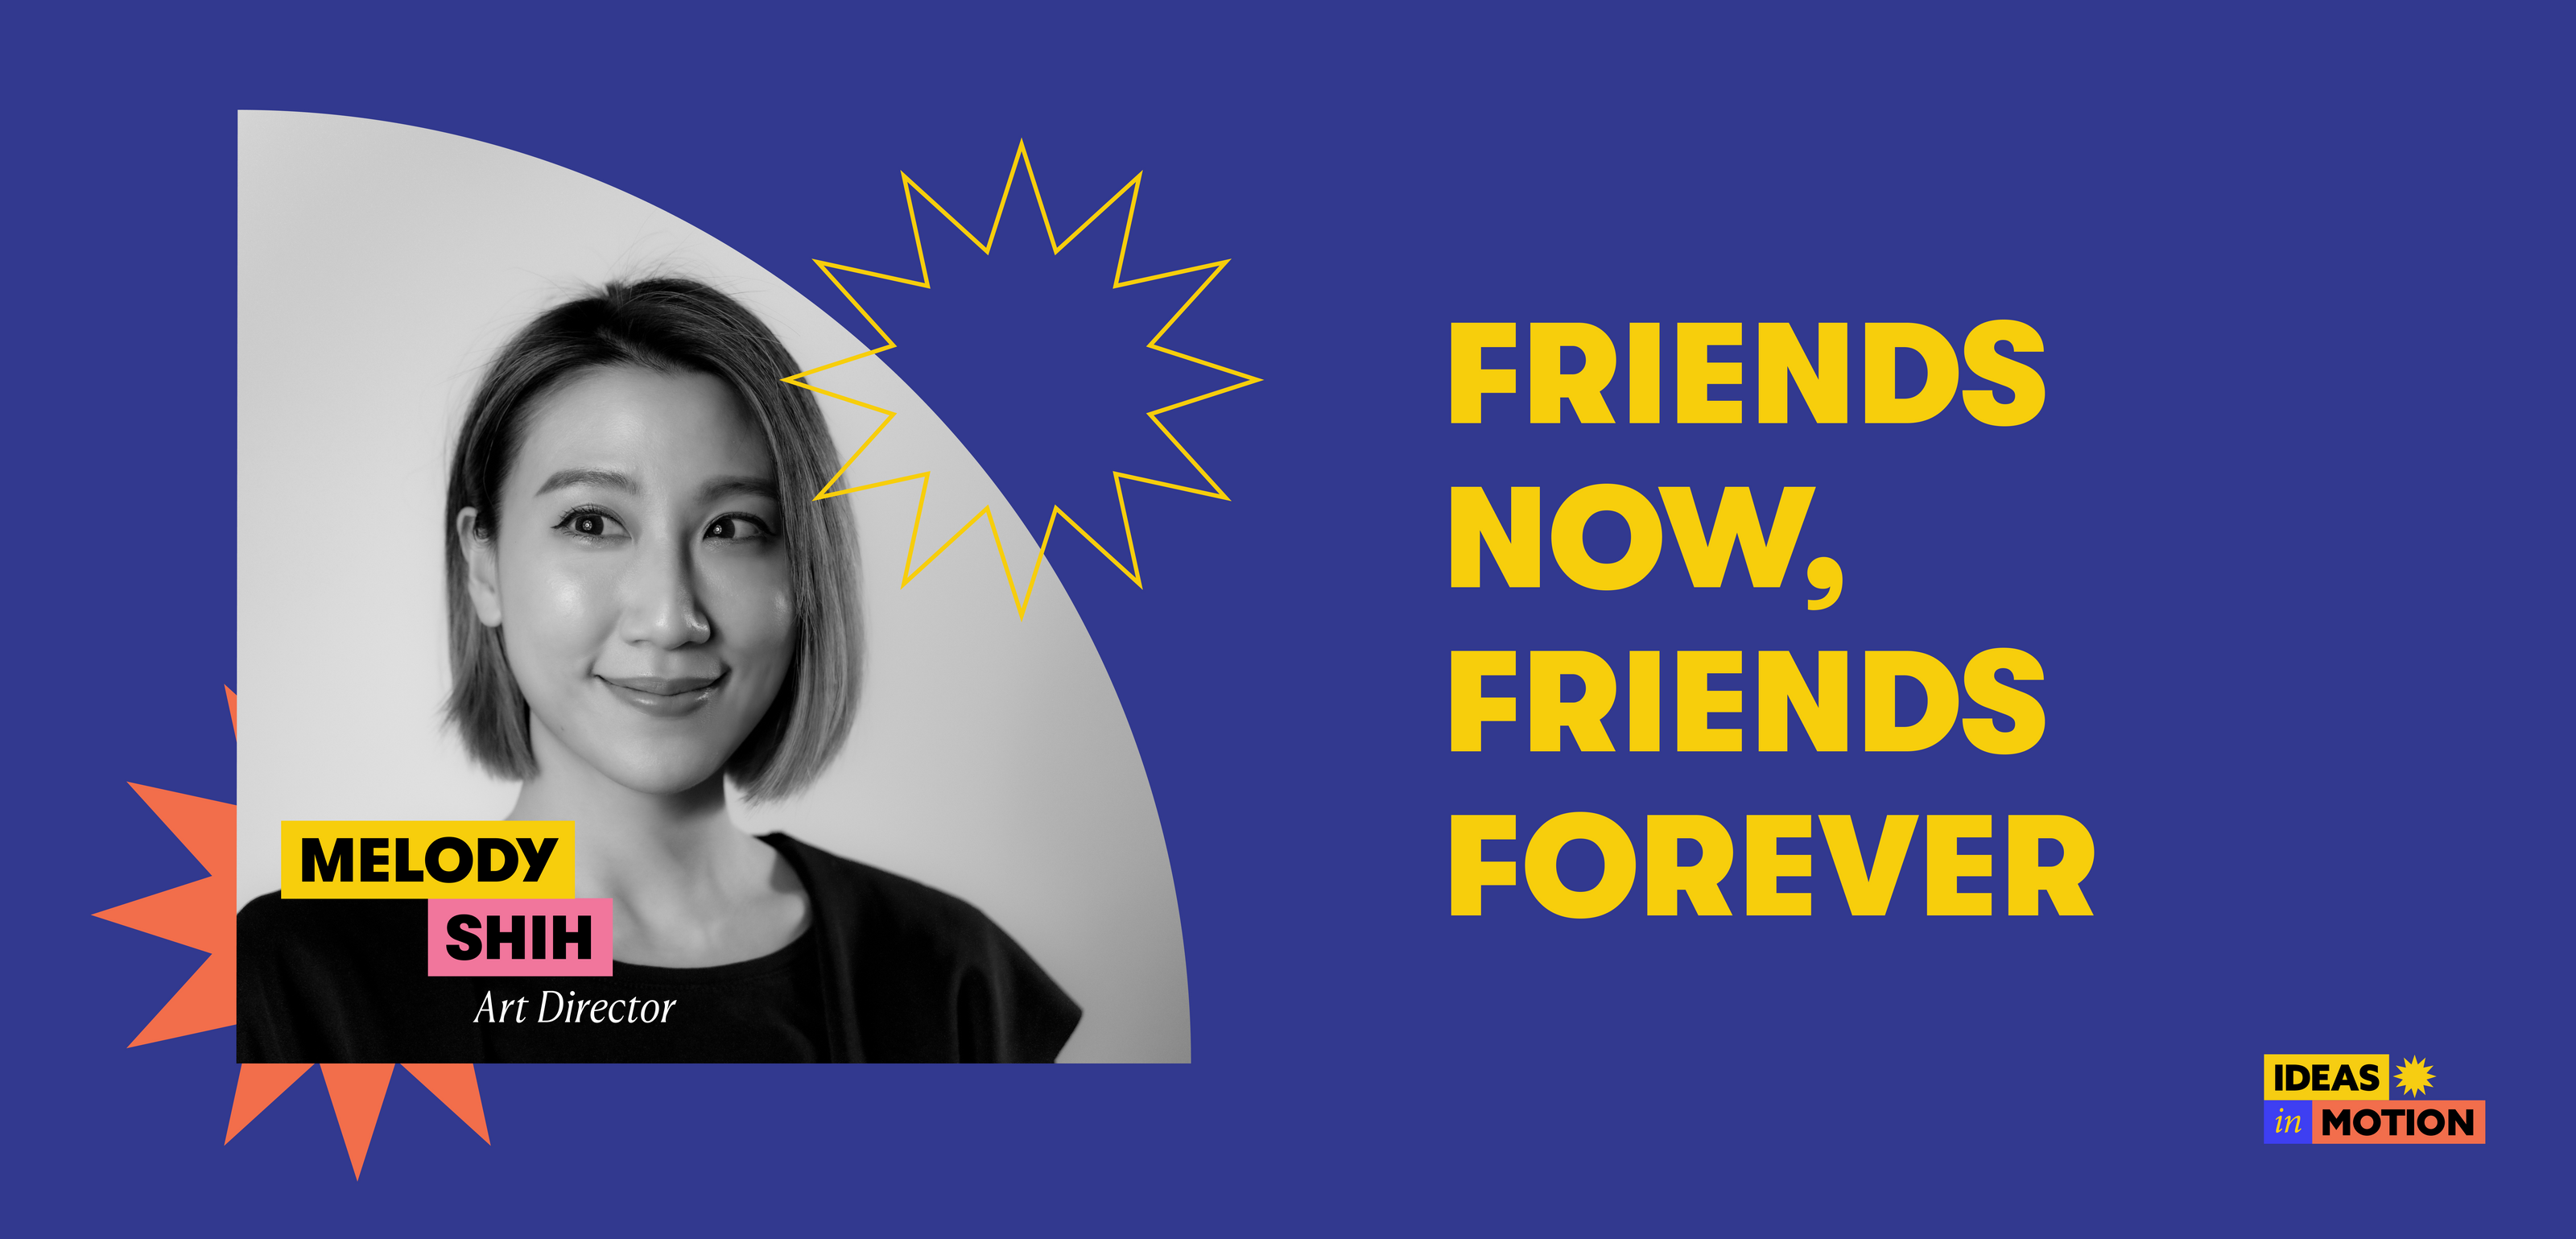 Friends Now, Friends Forever | Melody Shih | Ideas in Motion 